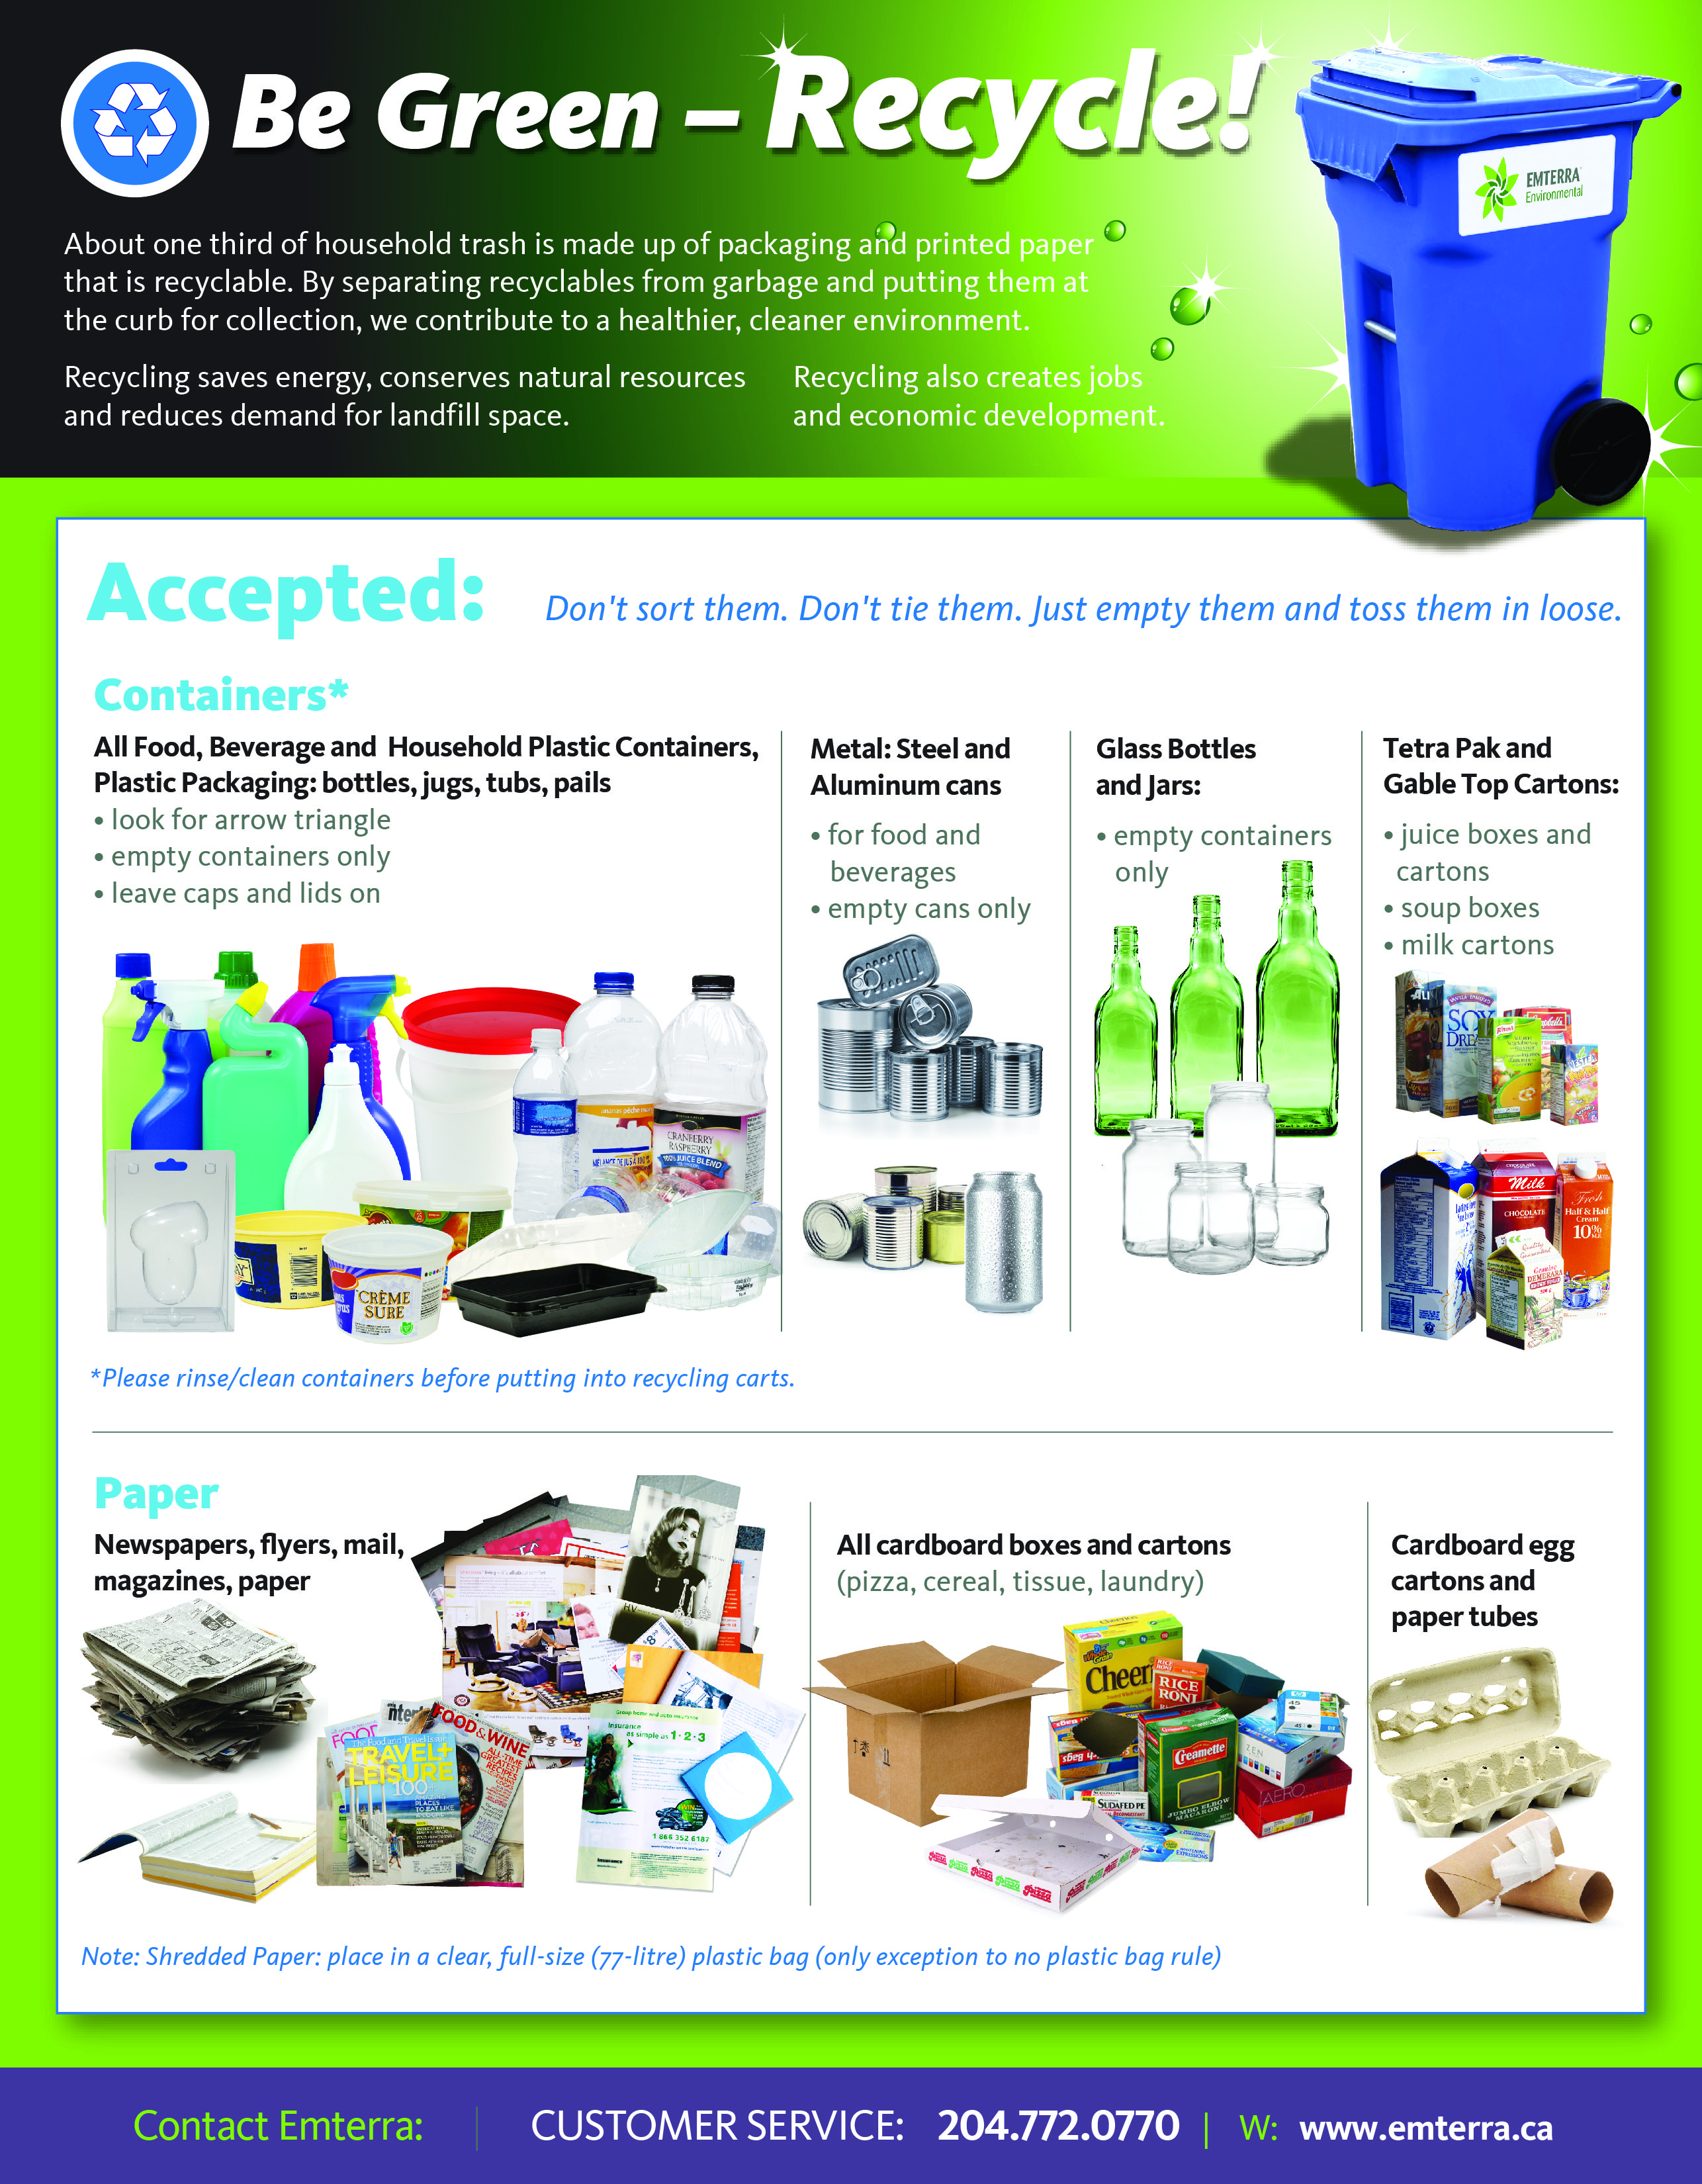 RM of St. Clements Curbside Pickup Recyclable Items